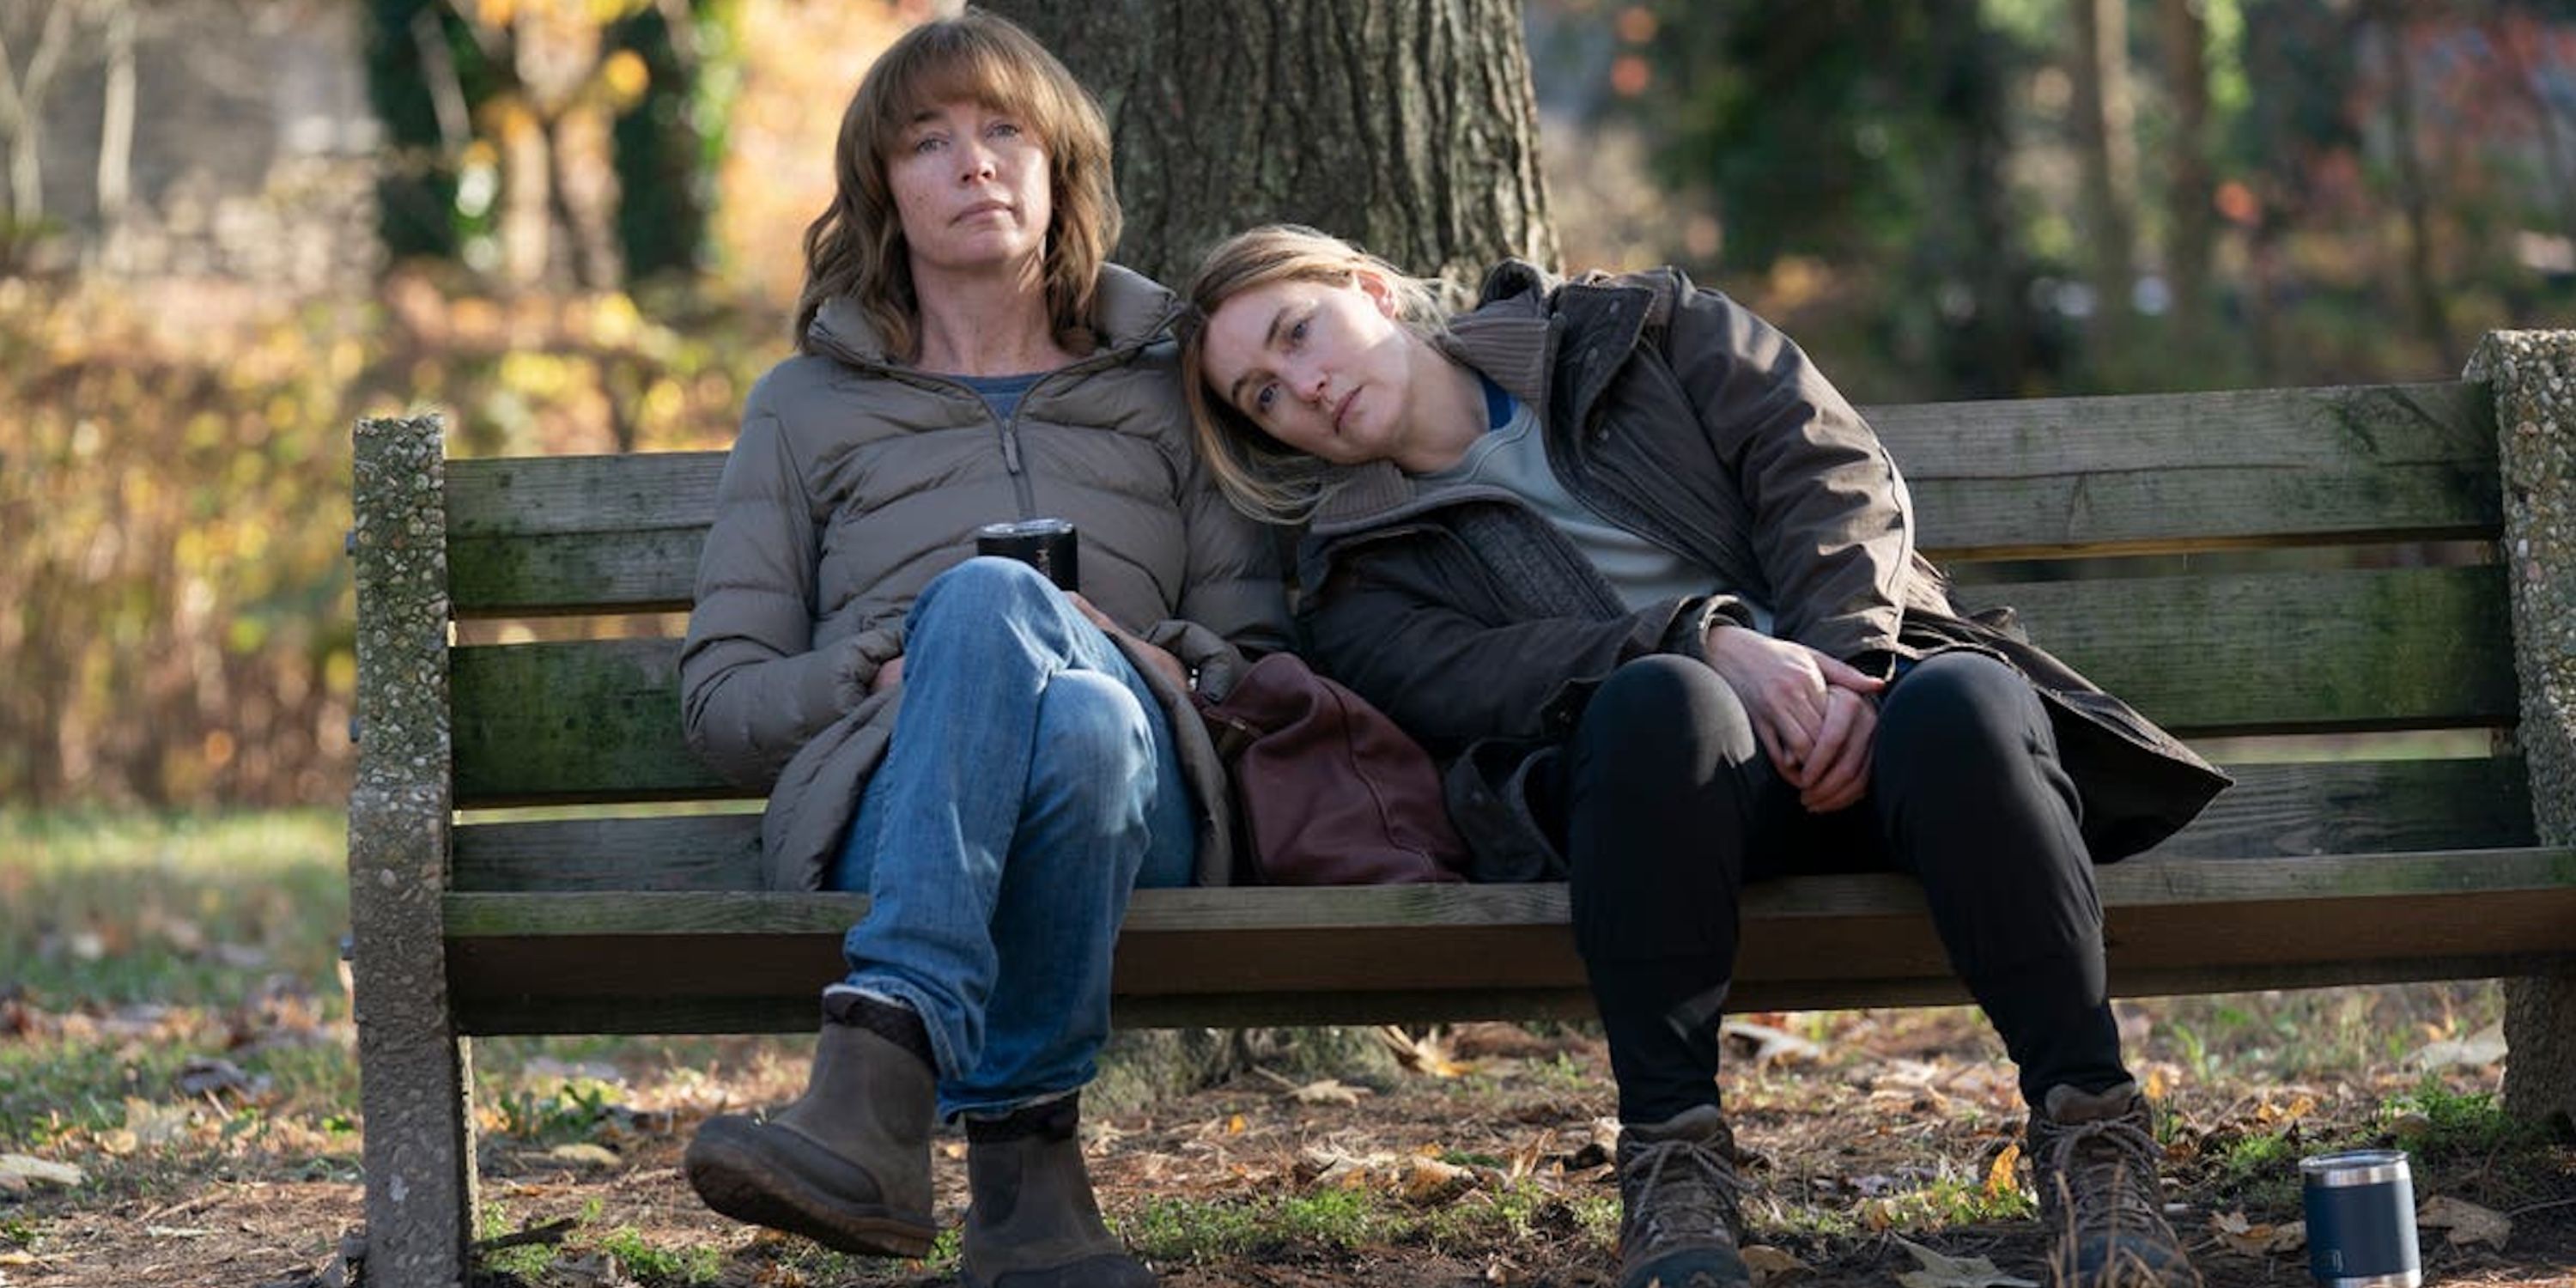 Julianne Nicholson as Lori Ross and Kate Winslet as Mare Sheehan in Mare of Easttown on HBO Max